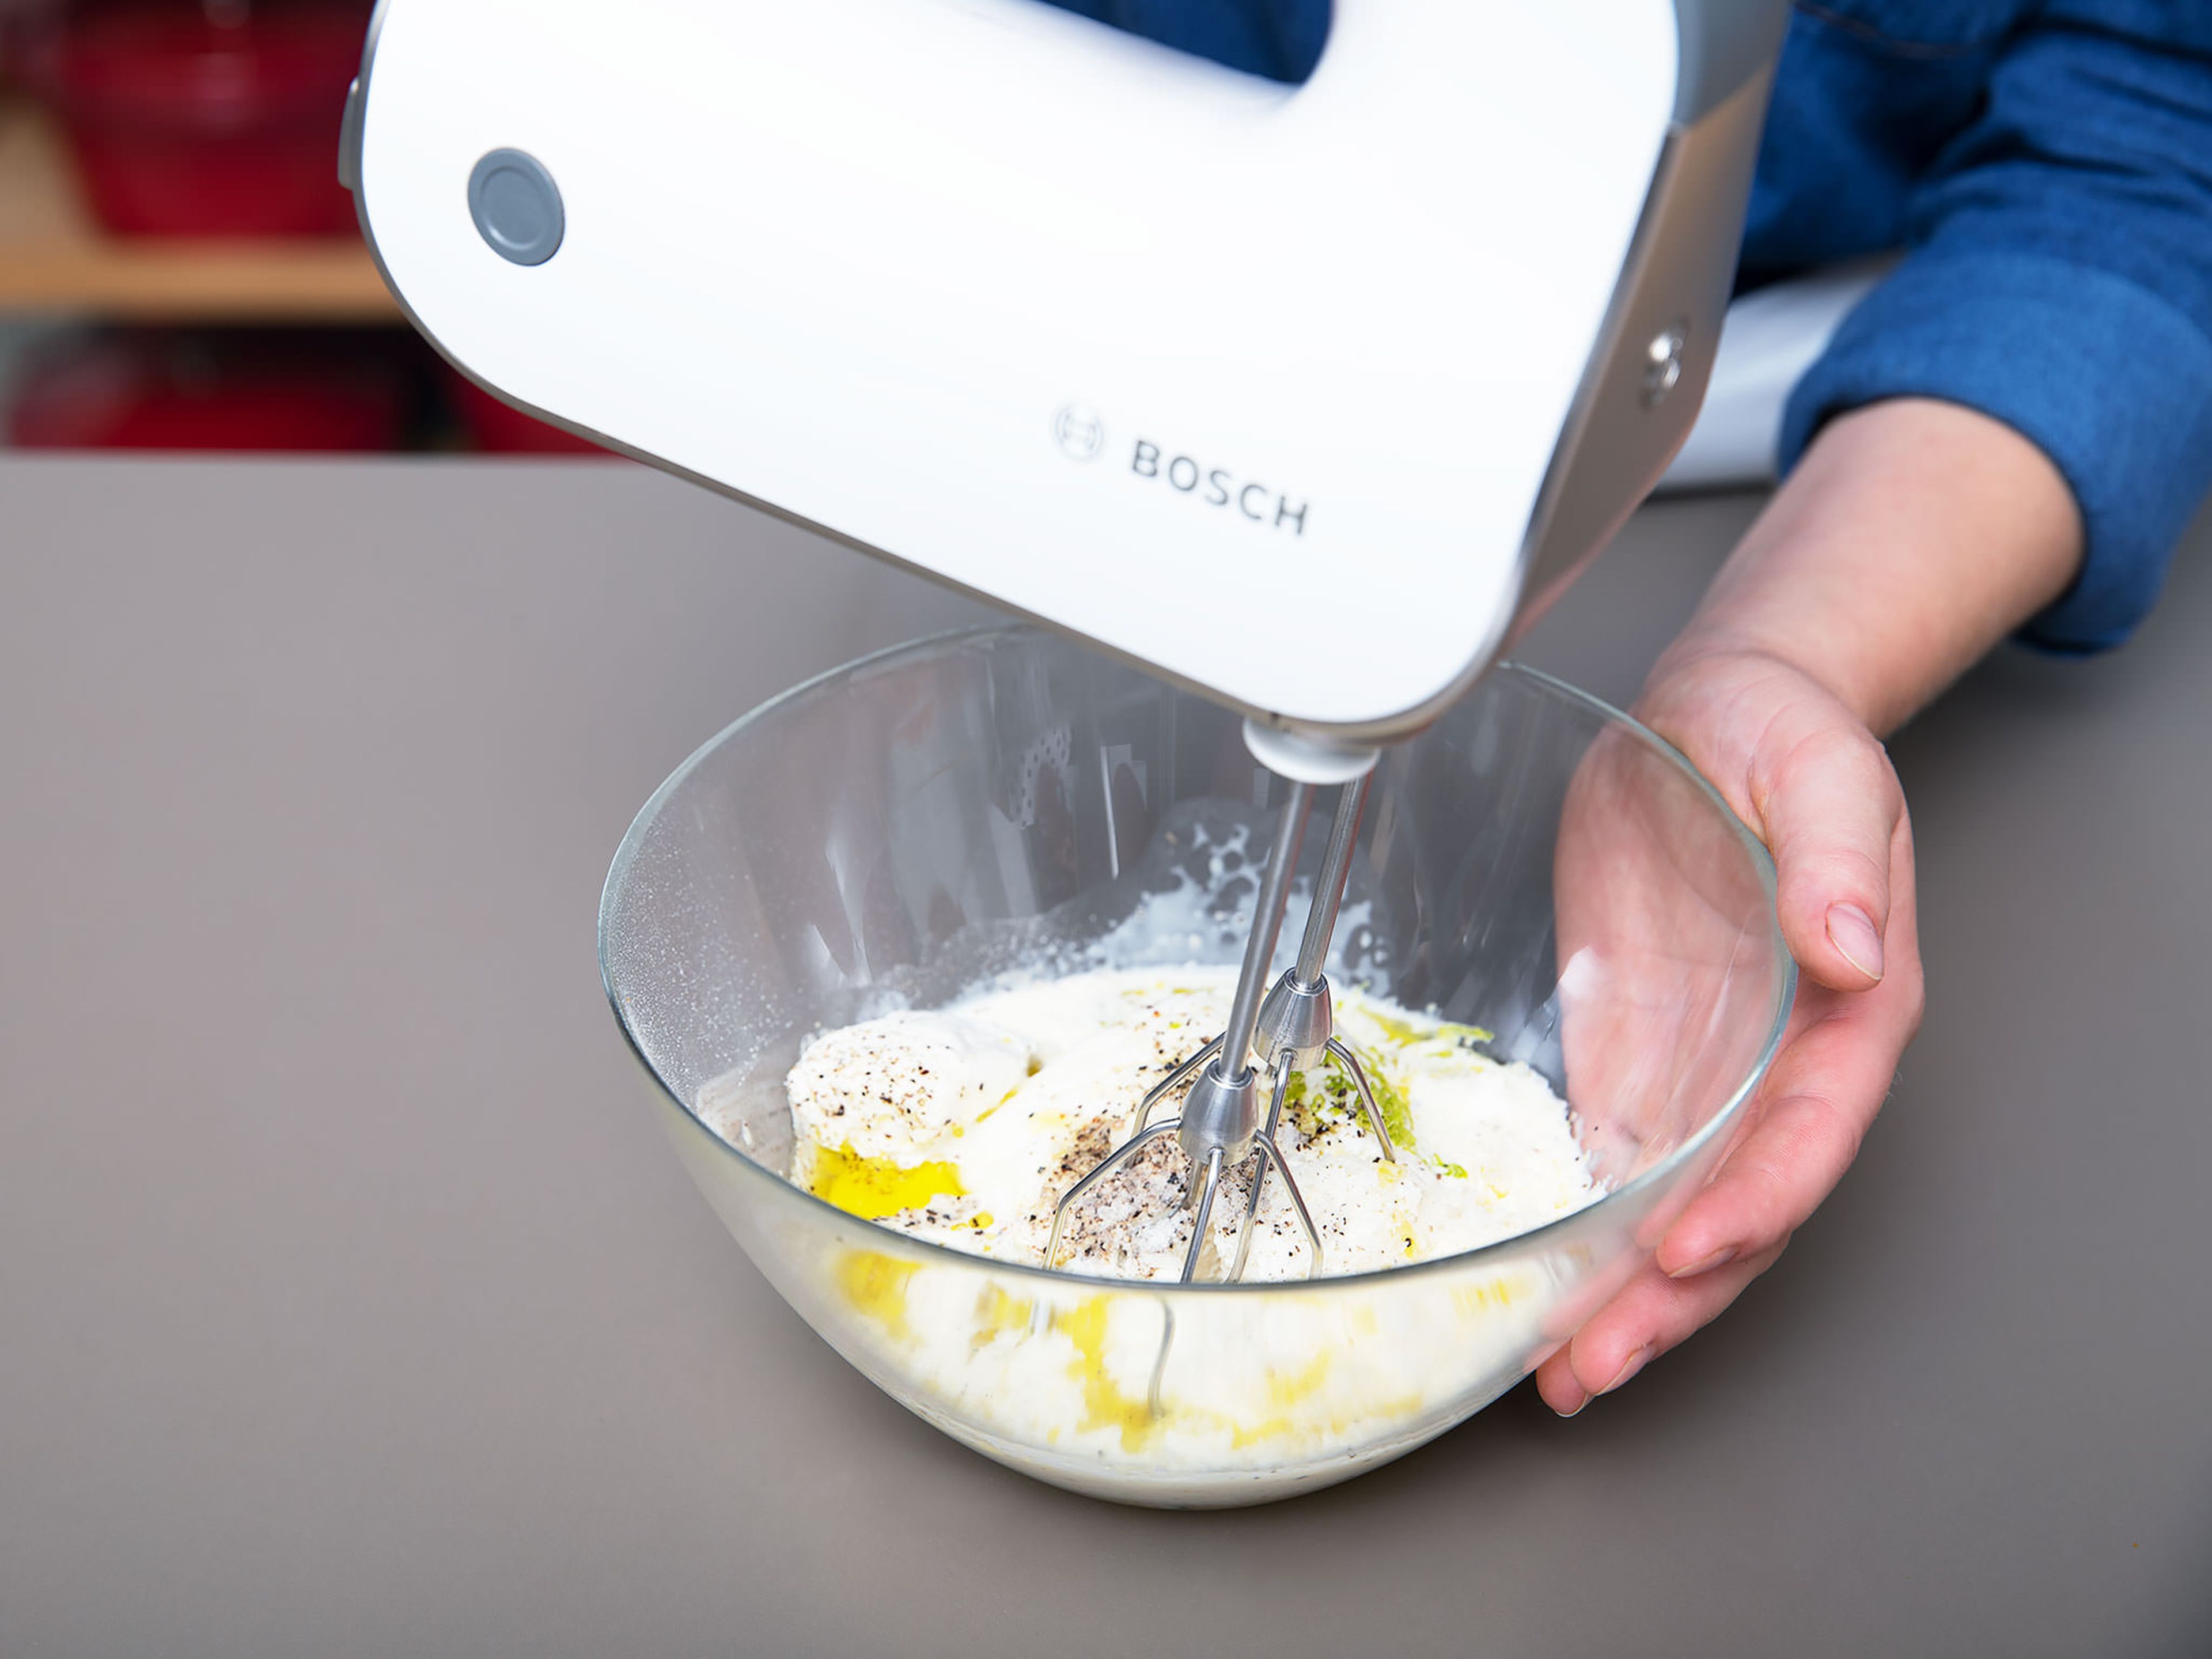 Peel and finely chop garlic. Zest and juice the lime. Add ricotta cheese, egg, heavy cream, chopped garlic, freshly grated Parmesan cheese, half of the lime zest, and remaining olive oil to a bowl and use a hand mixer to stir to combine. Season with salt and pepper to taste.